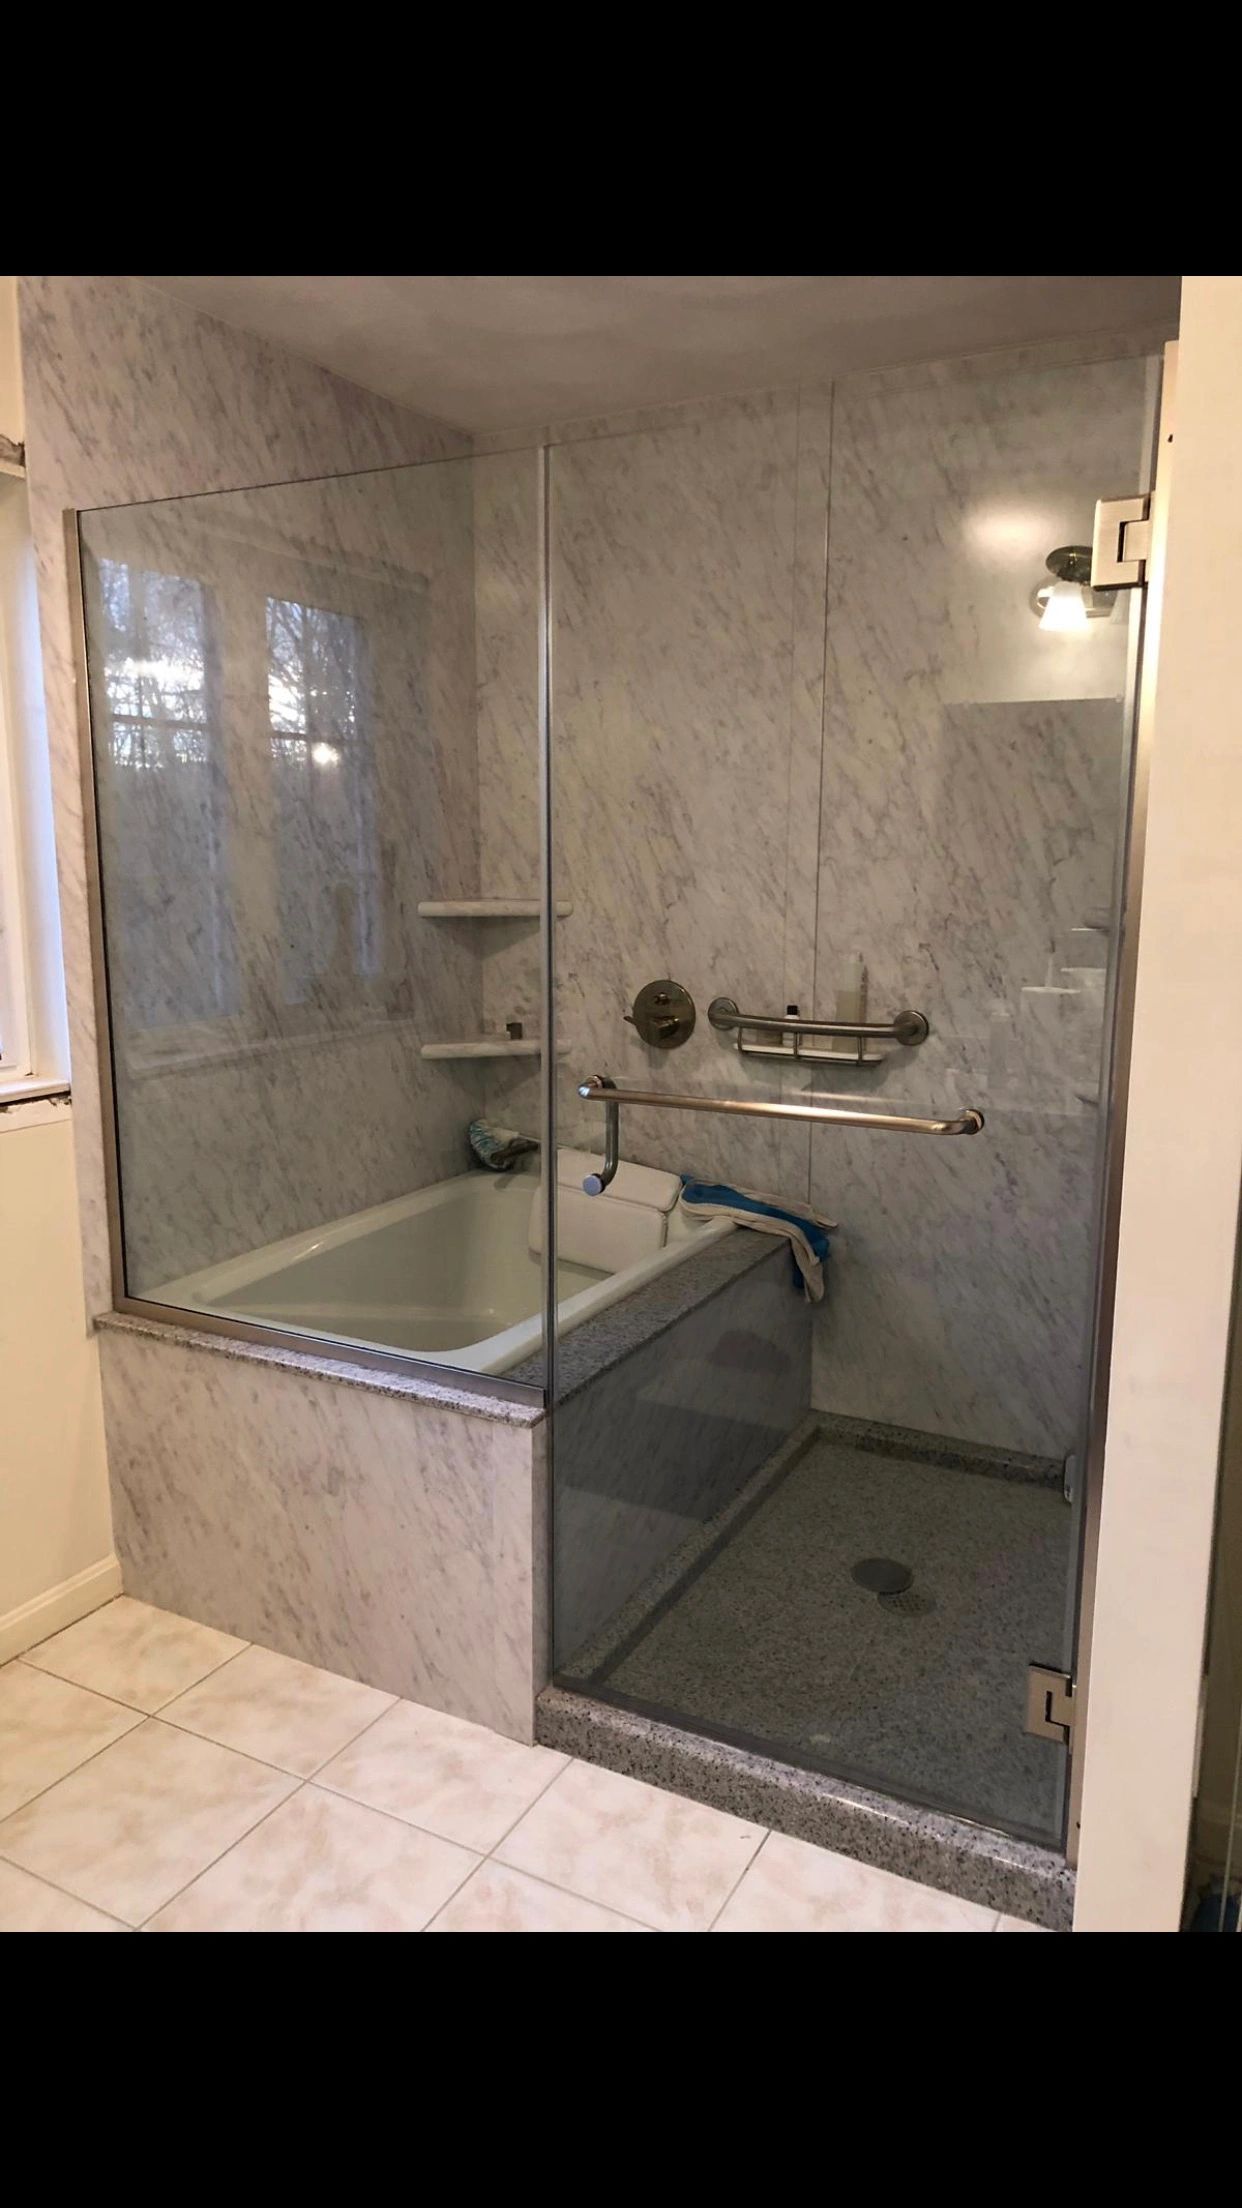 Glass doors on your tub or shower